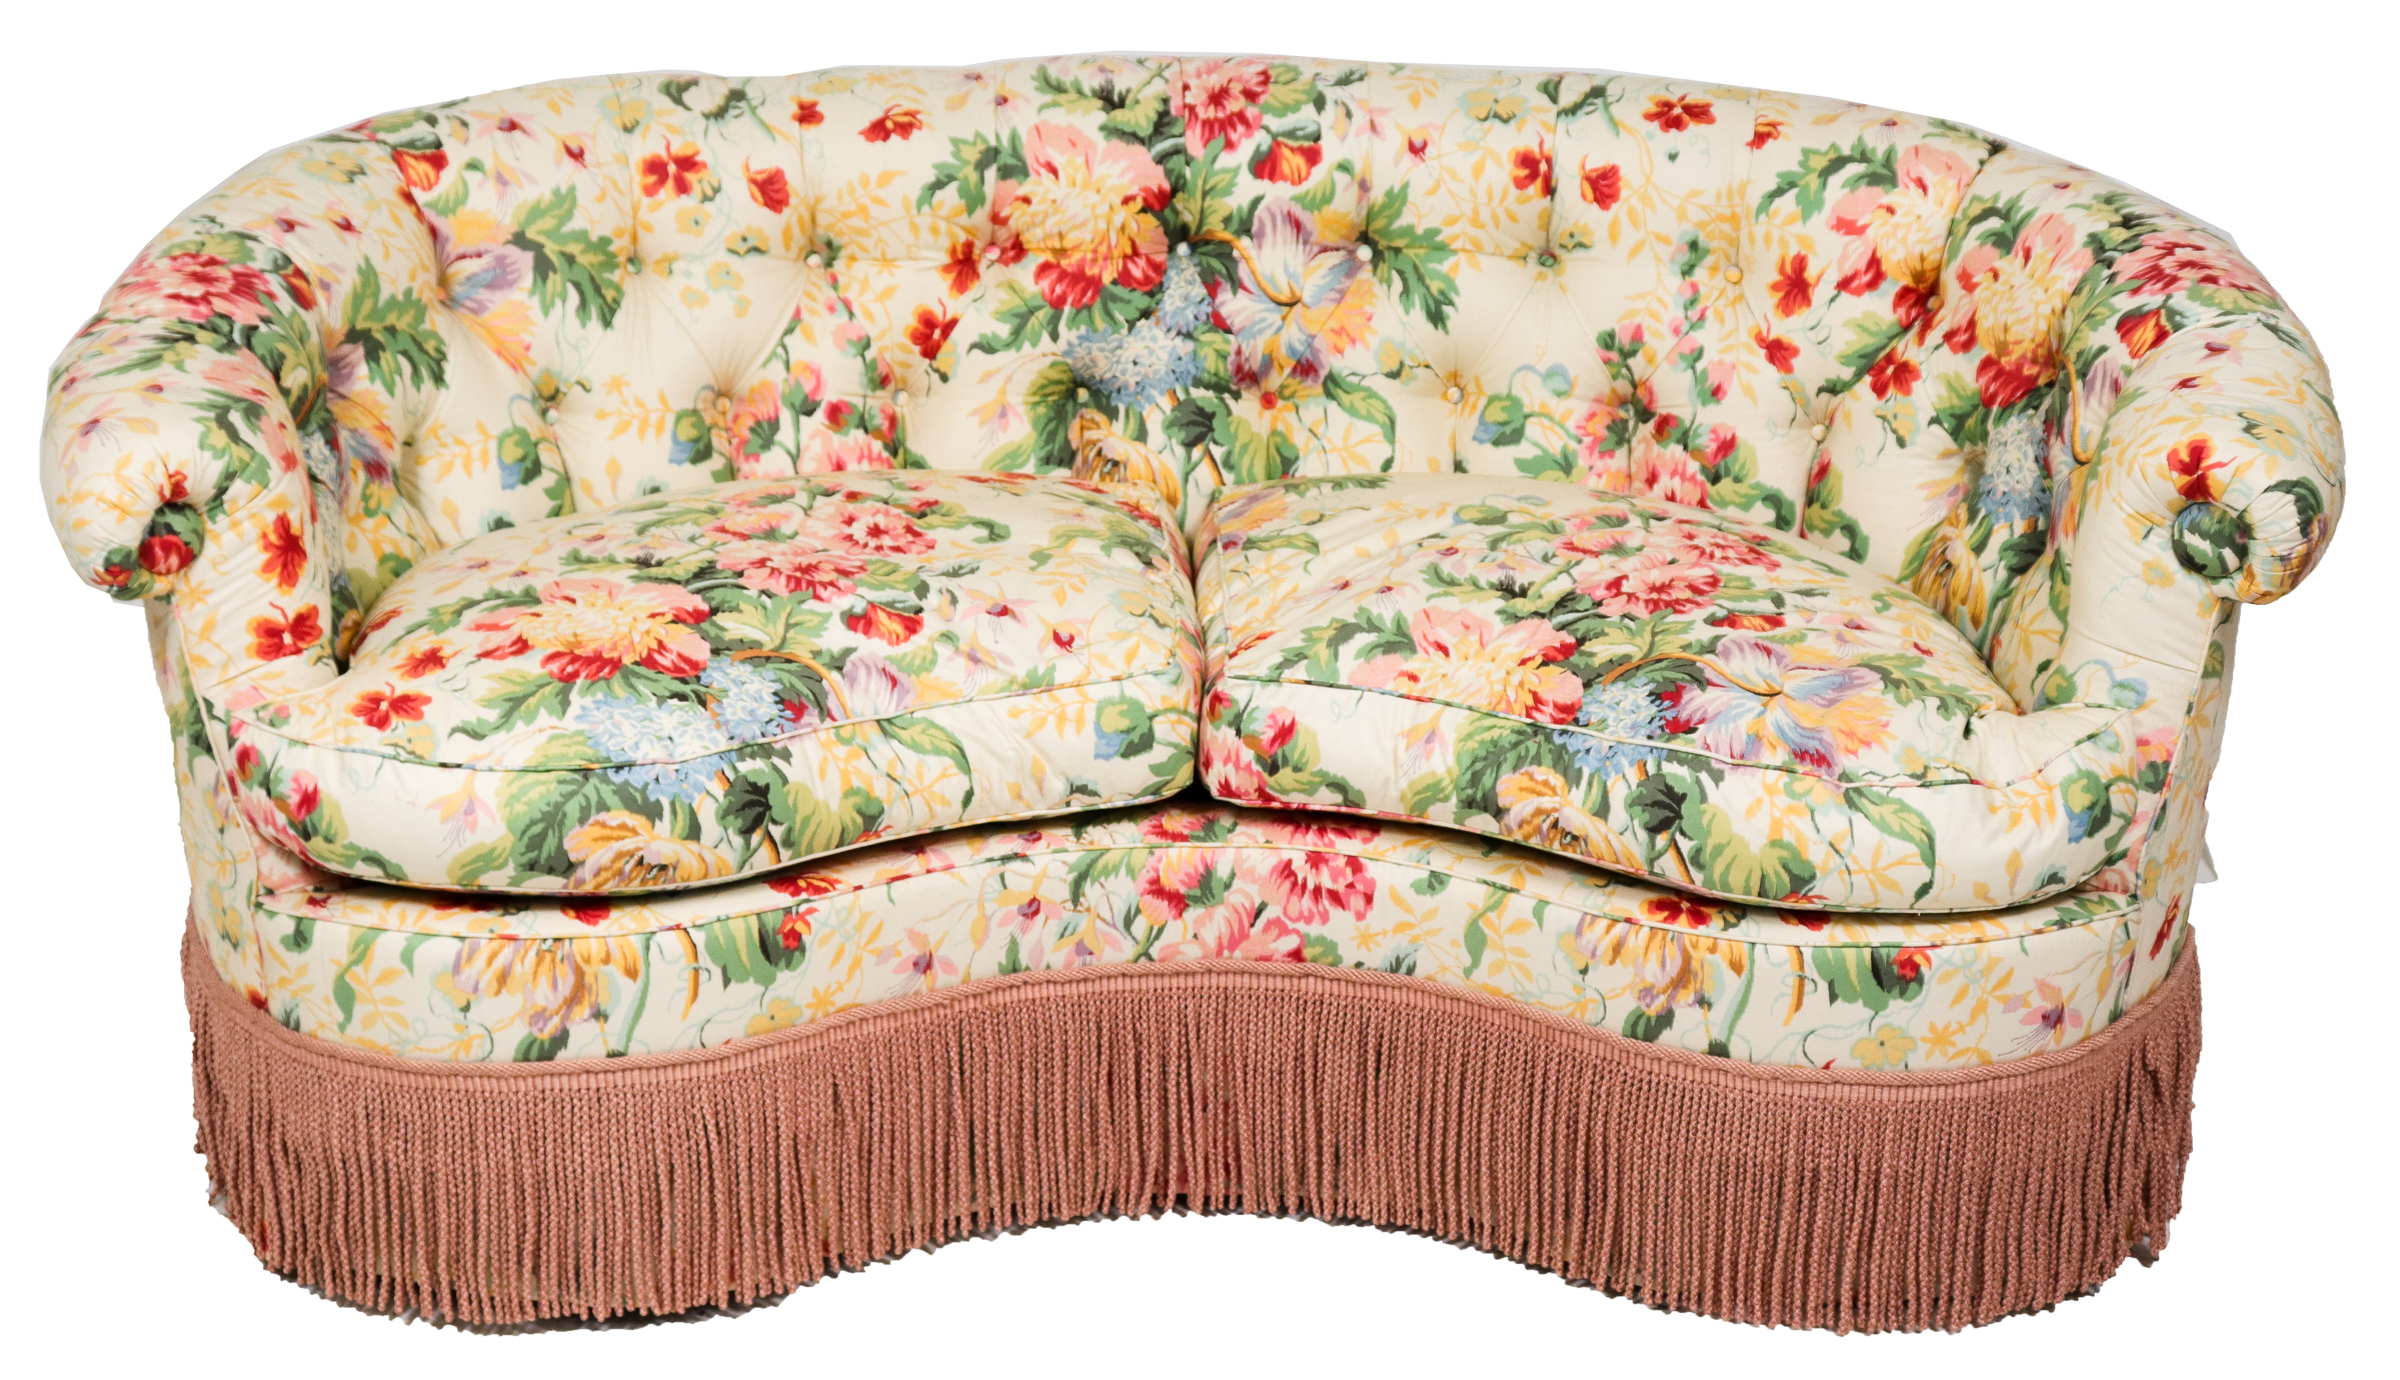 TUFTED FLORAL UPHOLSTERED ROUND